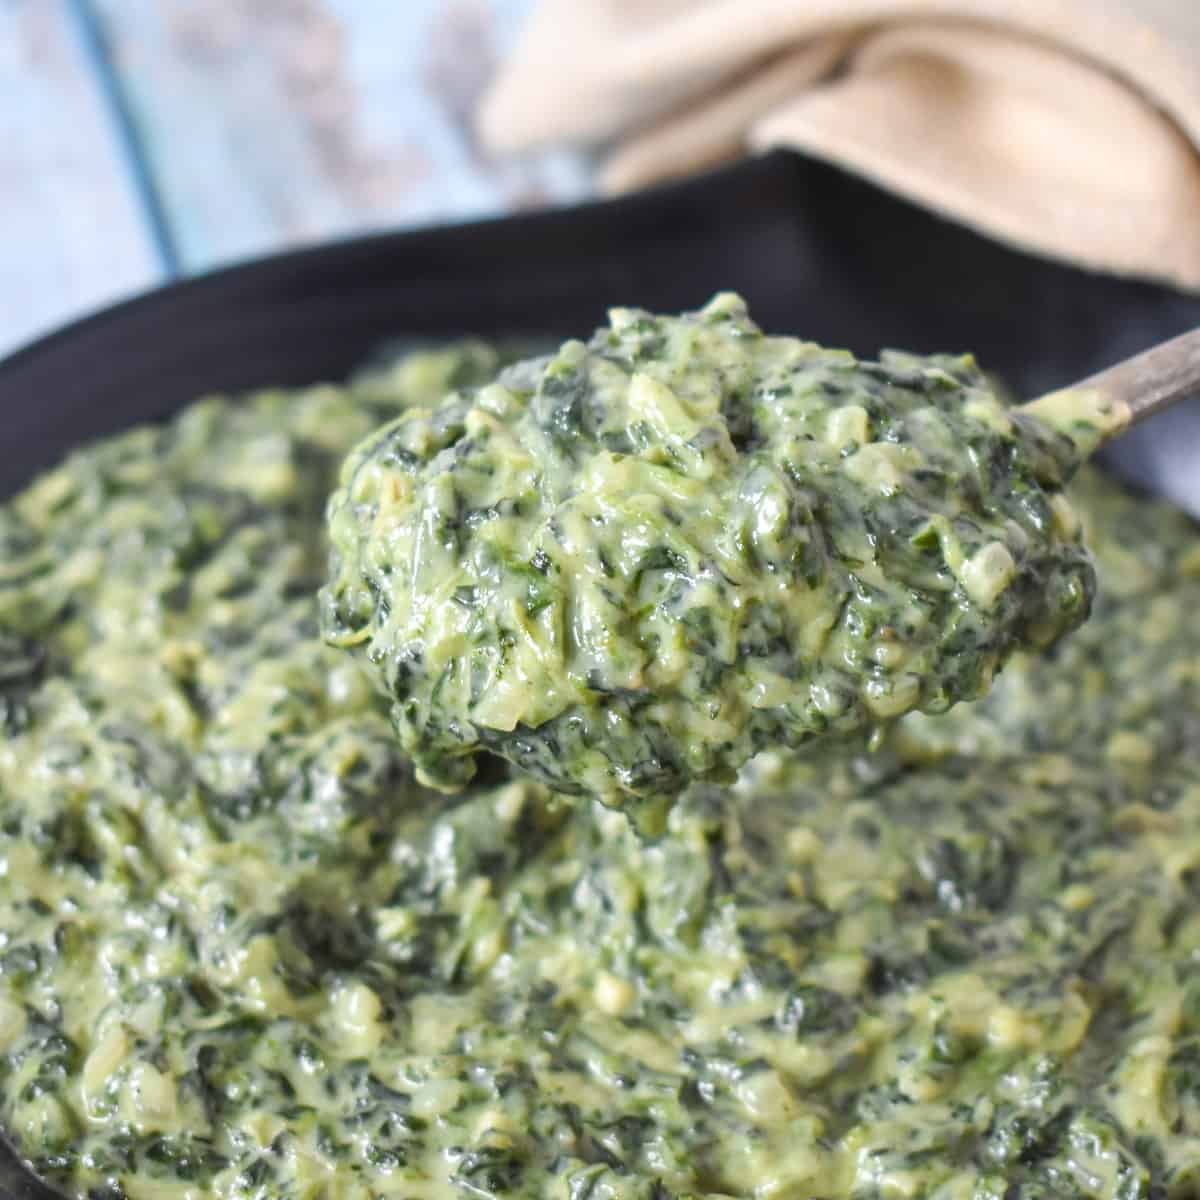 A close up of a spoonful of the creamed spinach that is served in a black dish.